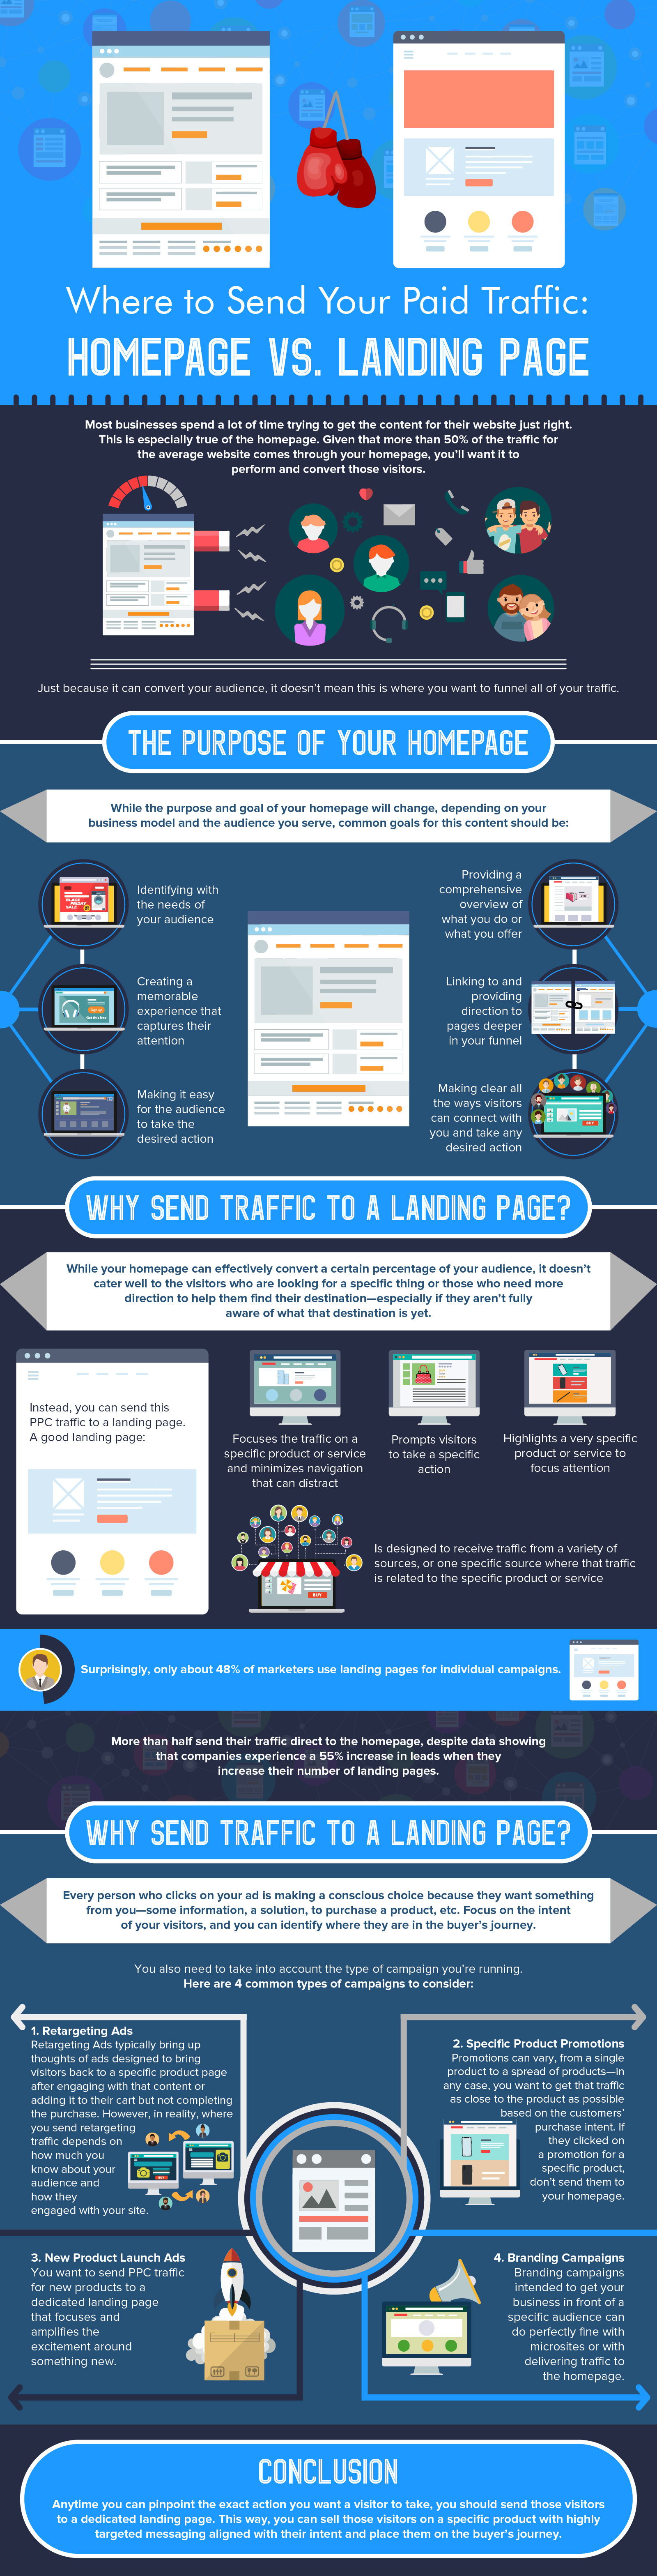 Where to Send Your Paid Traffic: Homepage vs. Landing Page